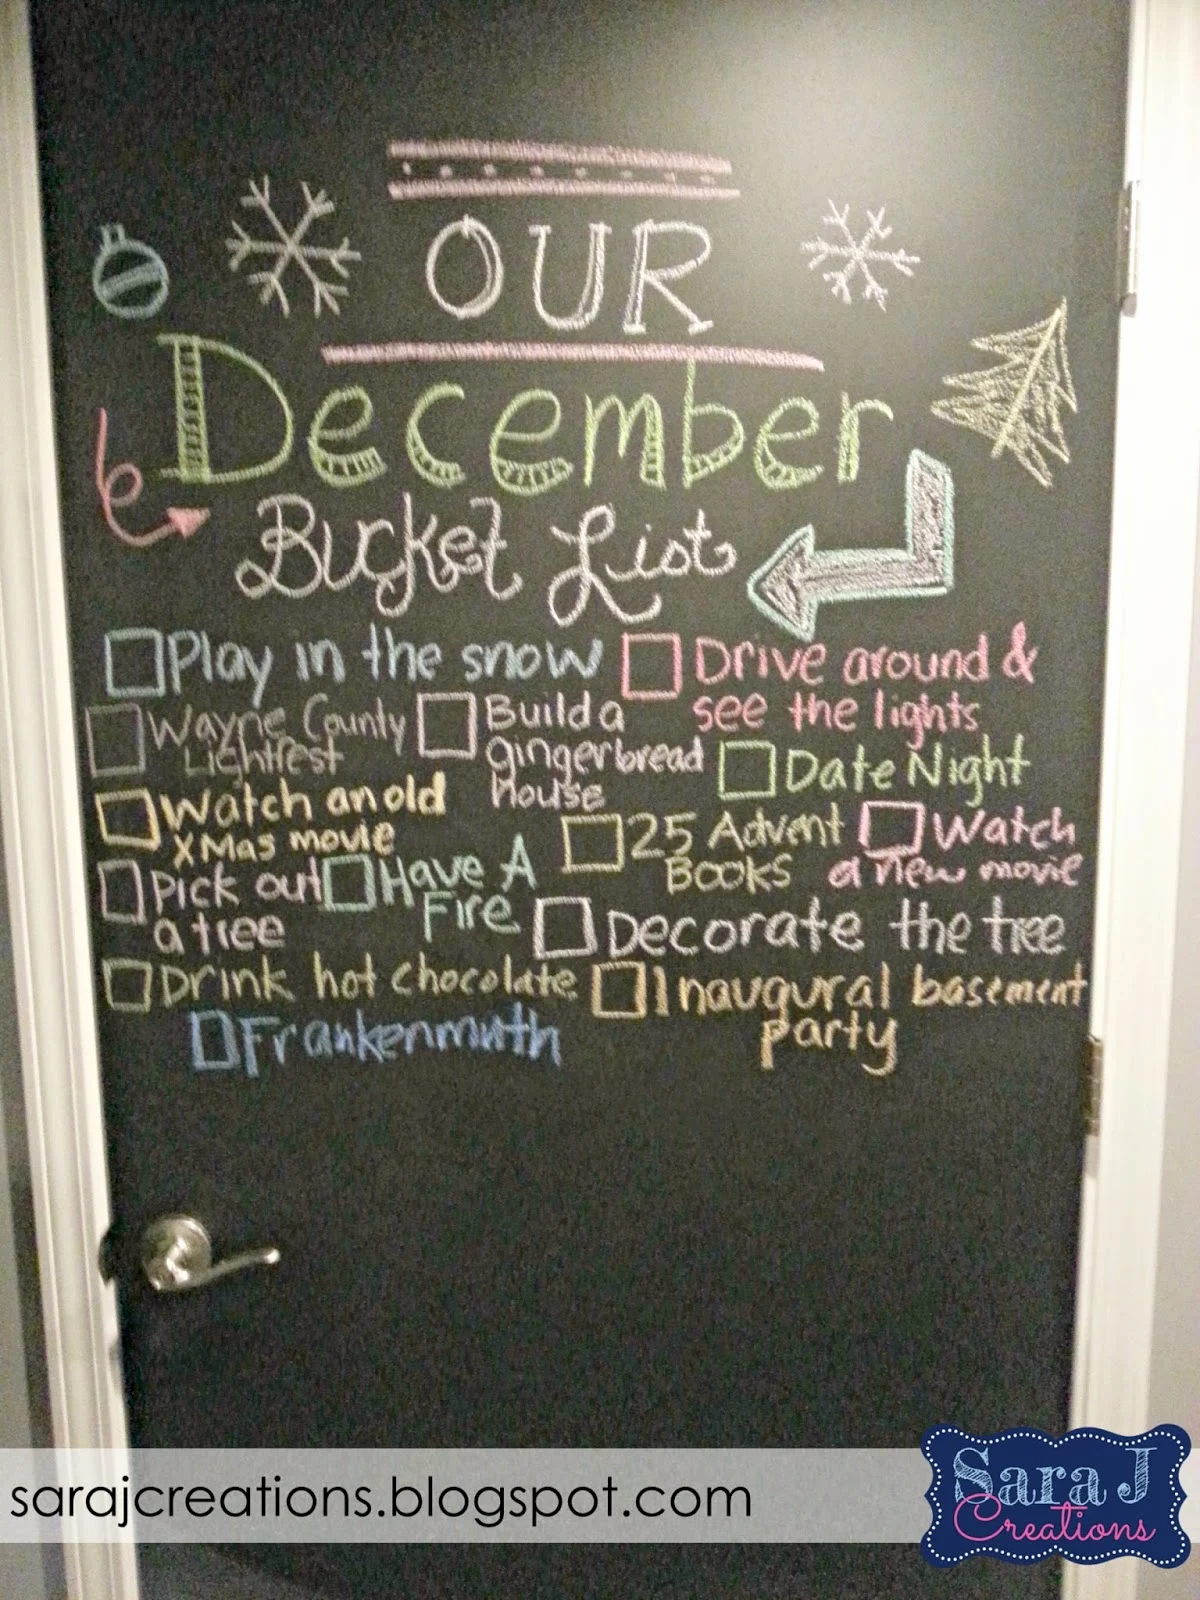 Counting down to Christmas by creating a December bucket list with crafts, ideas, DIY, and traditions to make the month fun as a family.